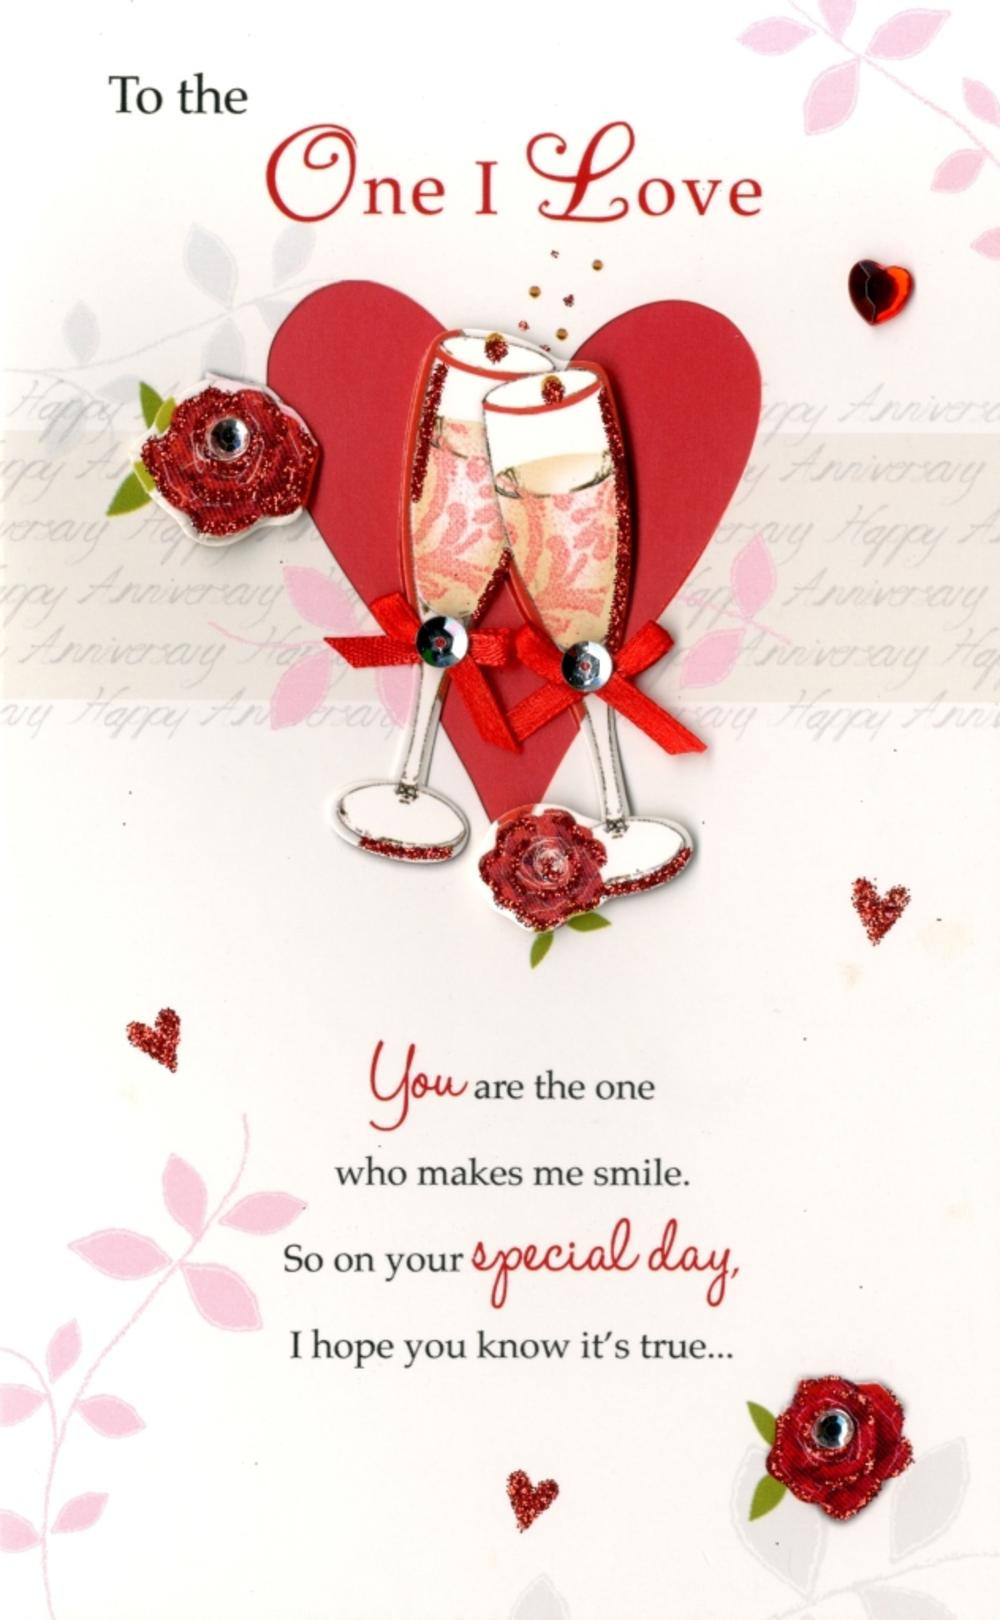 Birthday Wishes For Loved One
 Happy Birthday To The e I Love Greeting Card